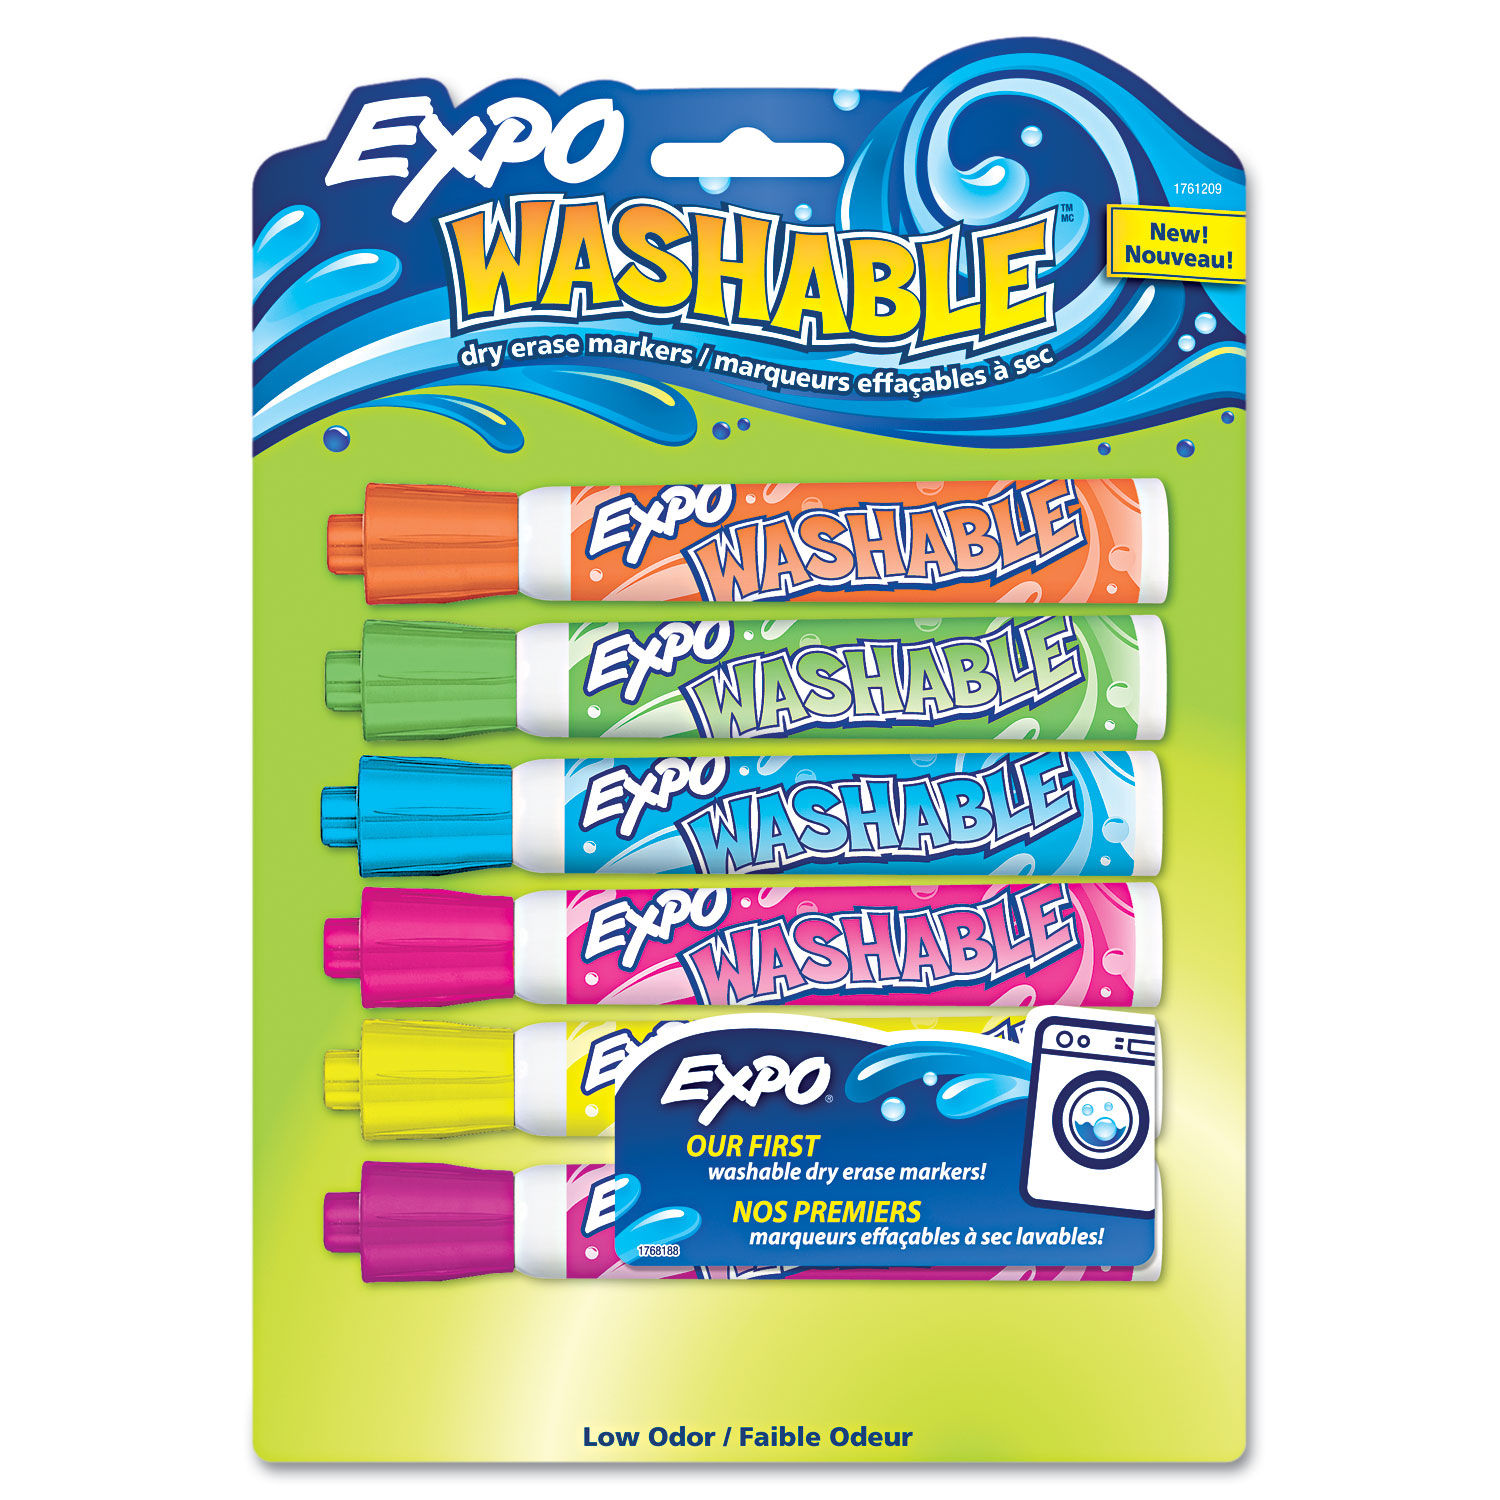 See the Washable™ Dry Erase Marker